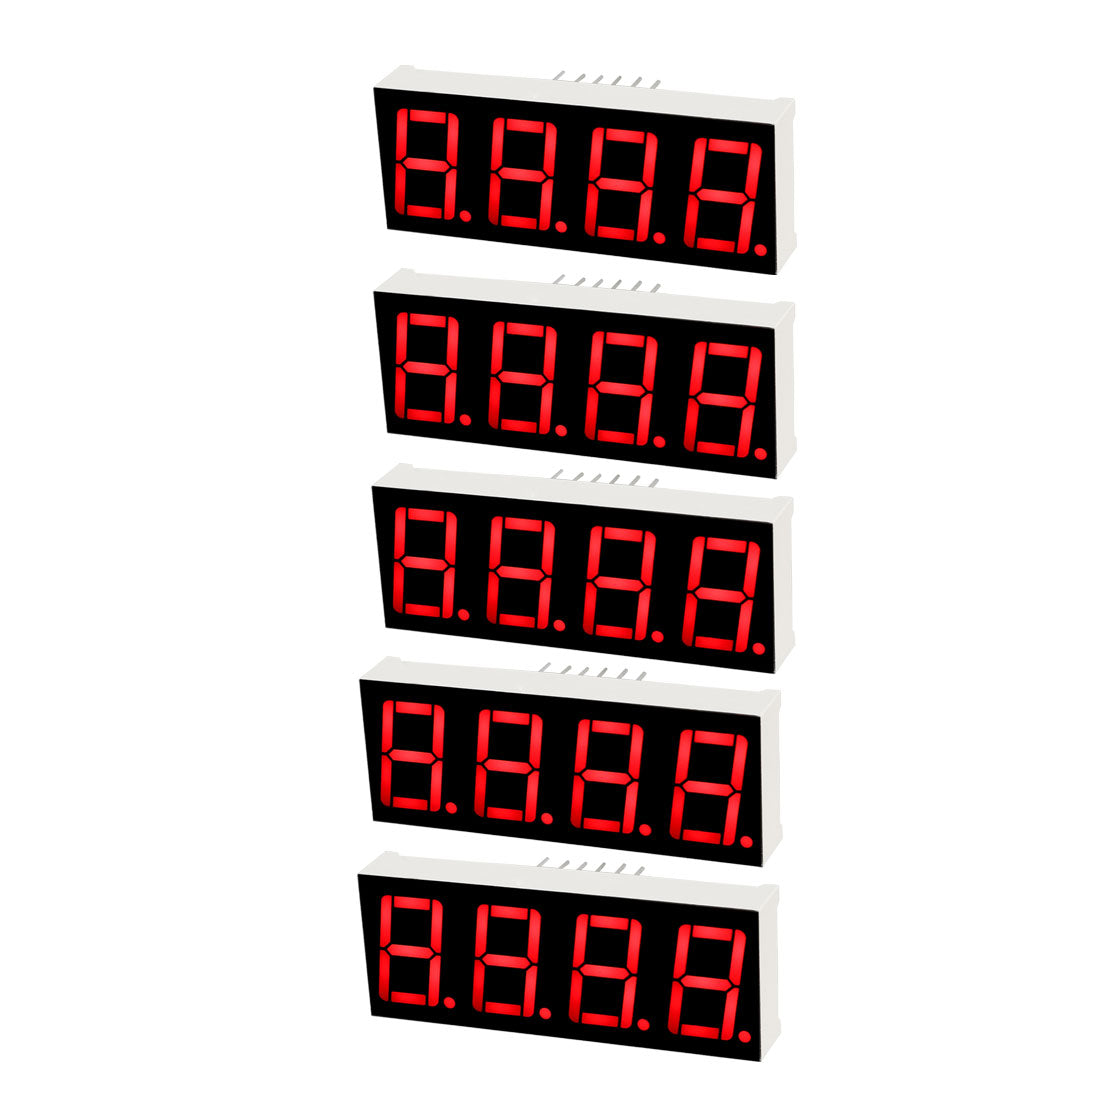 uxcell Uxcell Common Anode 12Pin 4 Bit 7 Segment 1.98 x 0.75 x 0.31 Inch 0.55" Red LED Display Digital Tube 5pcs